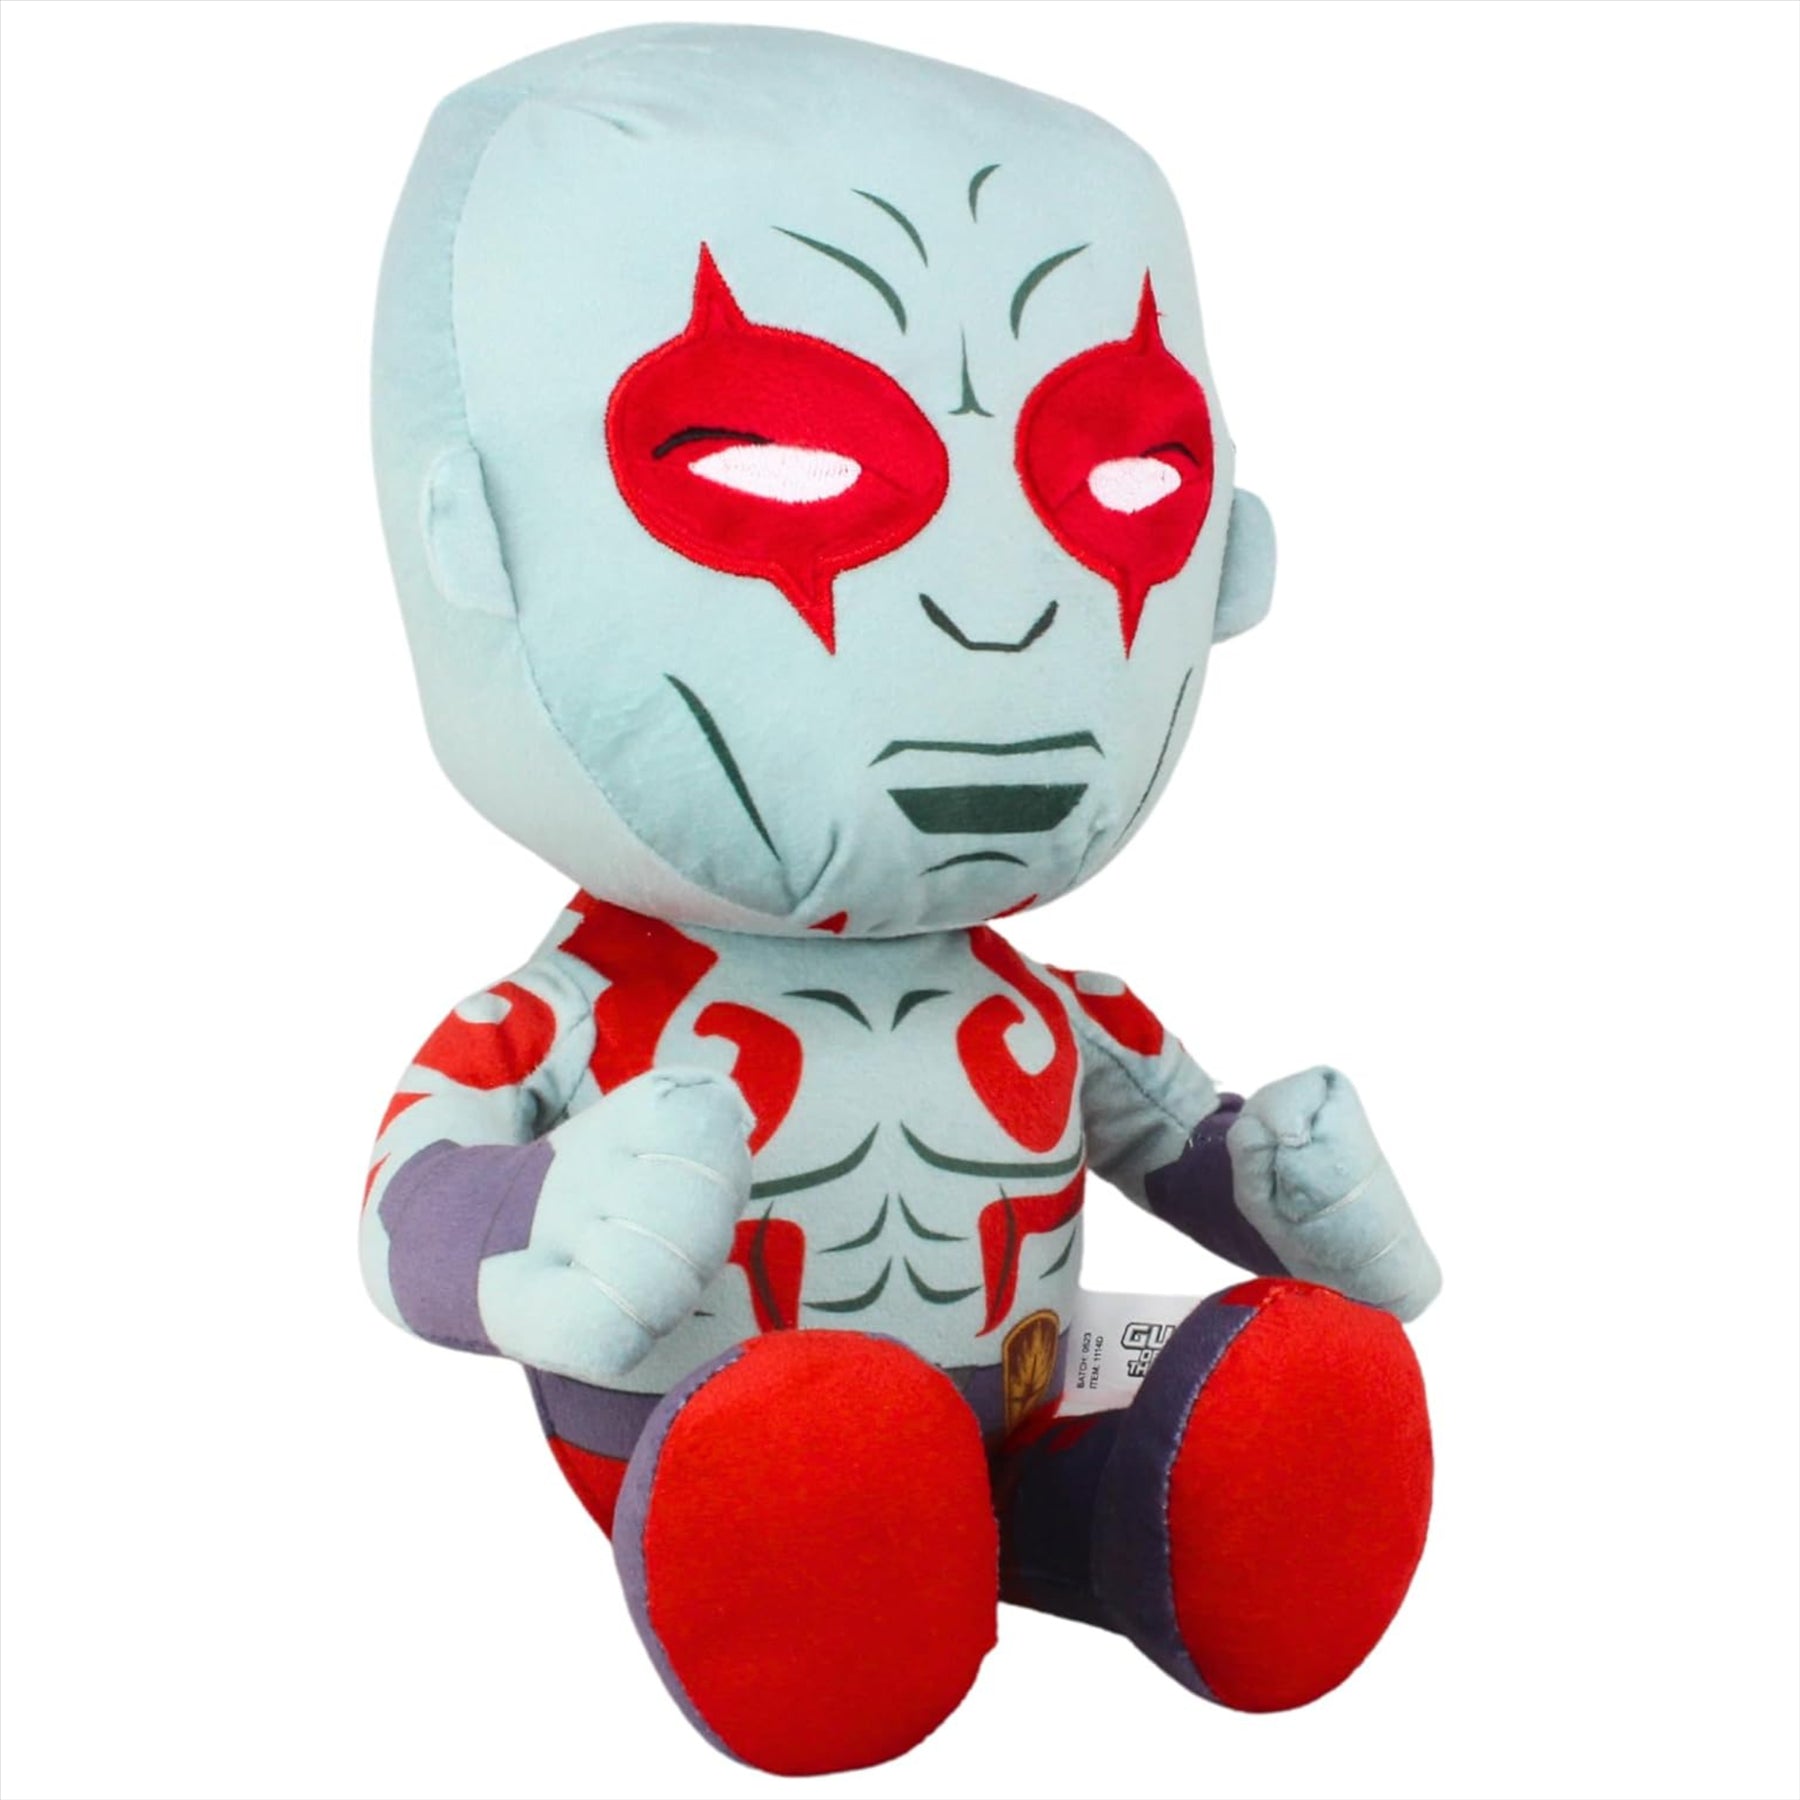 Guardians of the Galaxy Avengers Drax Super Soft Embroidered 36cm Plush Toy - Toptoys2u